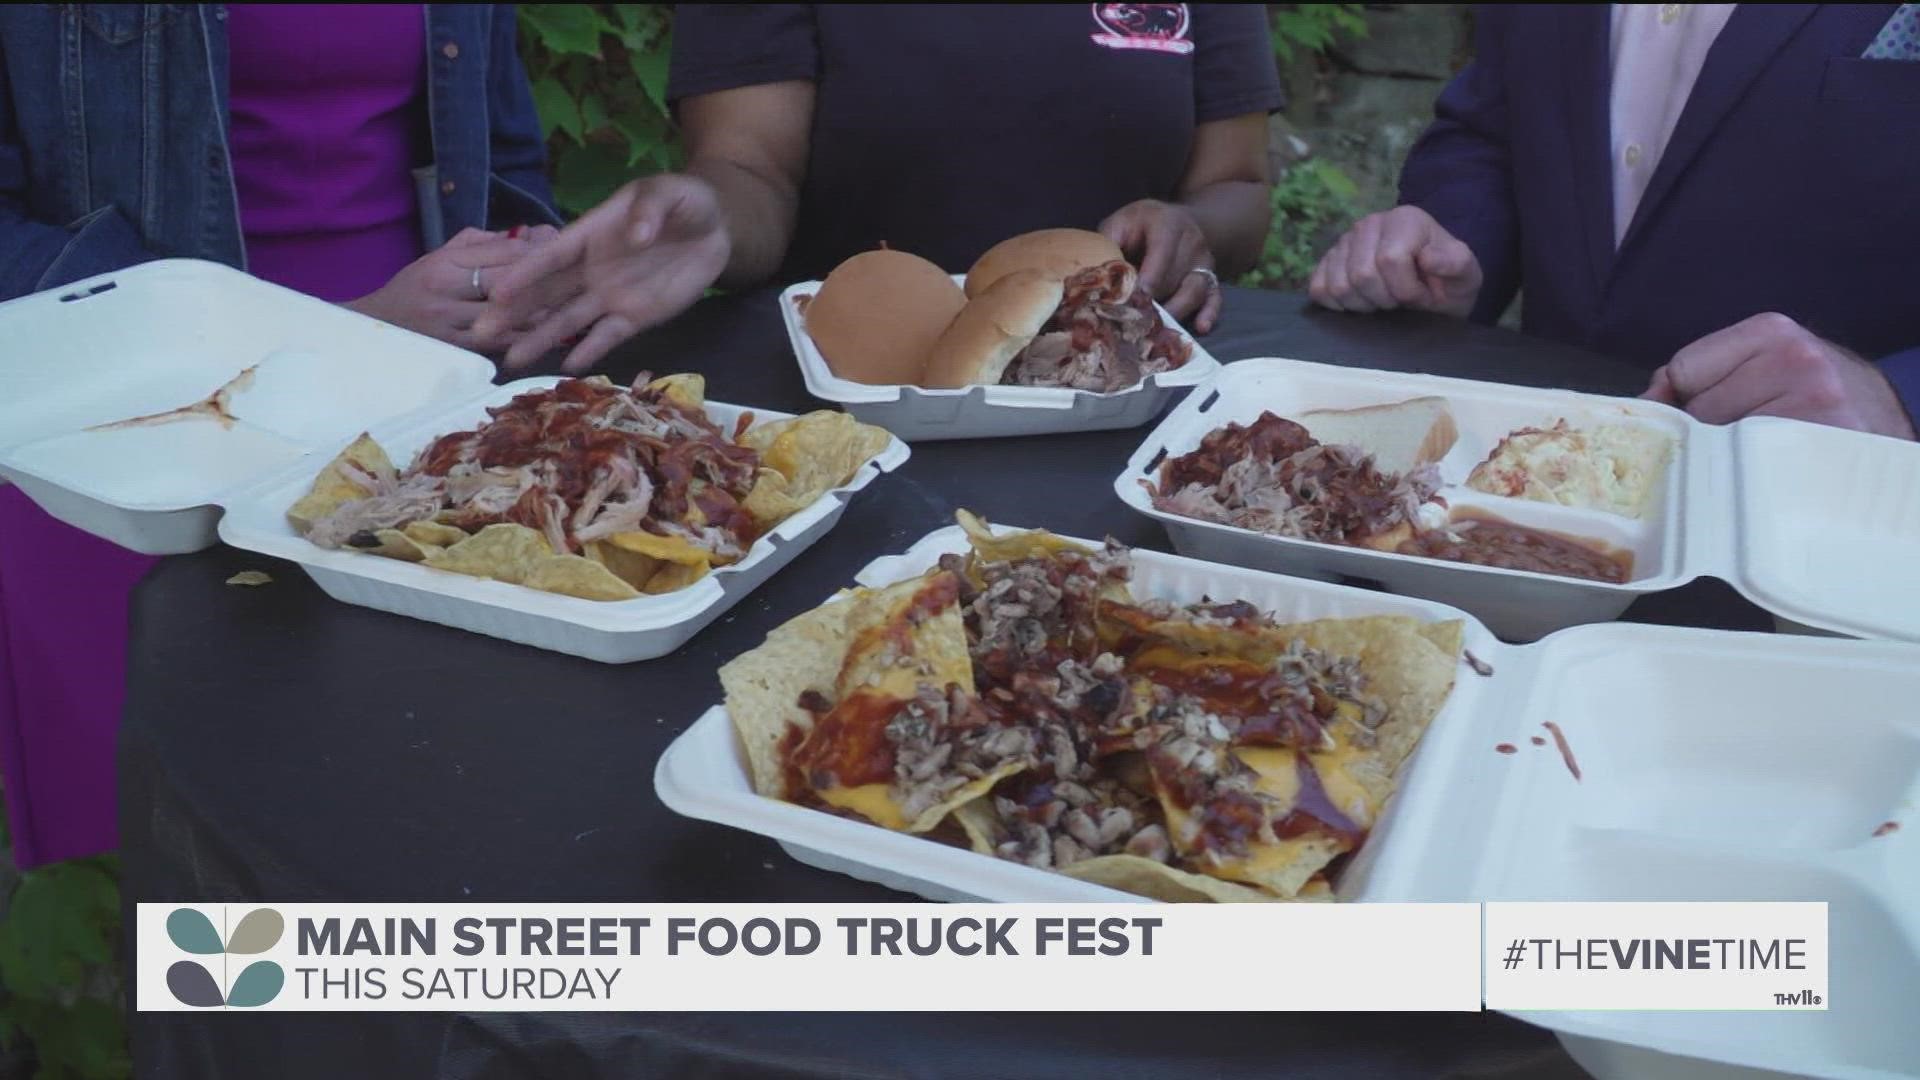 60-plus foods trucks, including Bryant's BBQ, will be out in full force for the return of the Main Street Food Truck Festival.